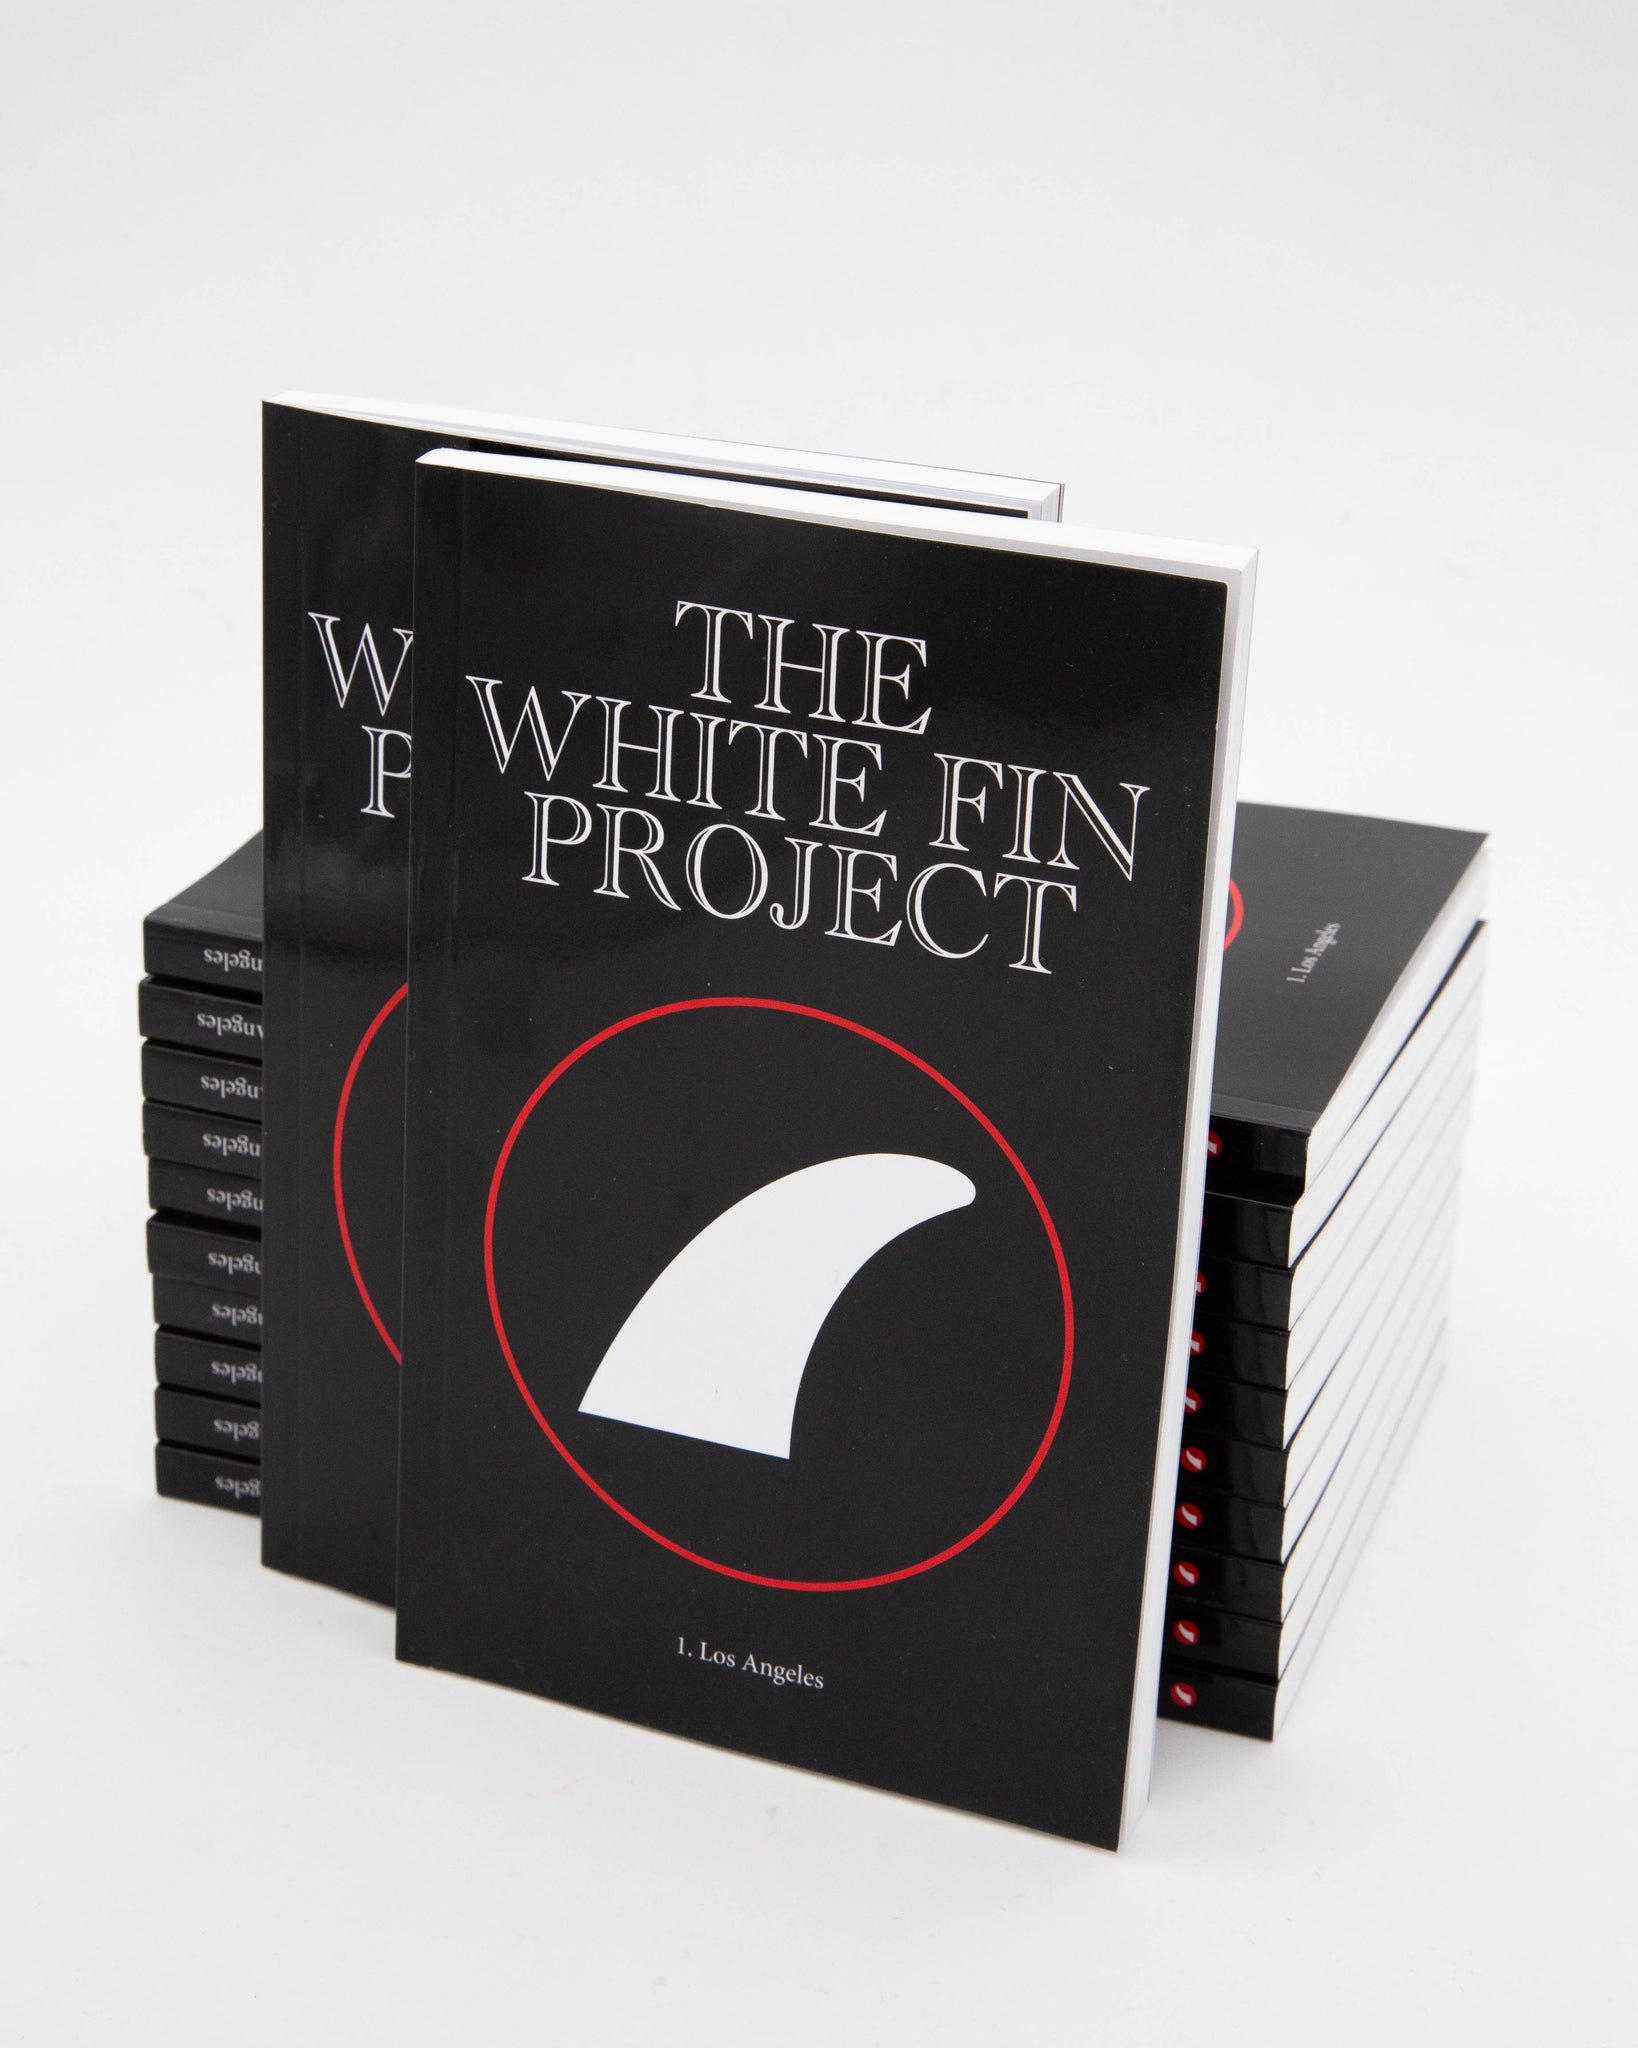 The White Fin Project